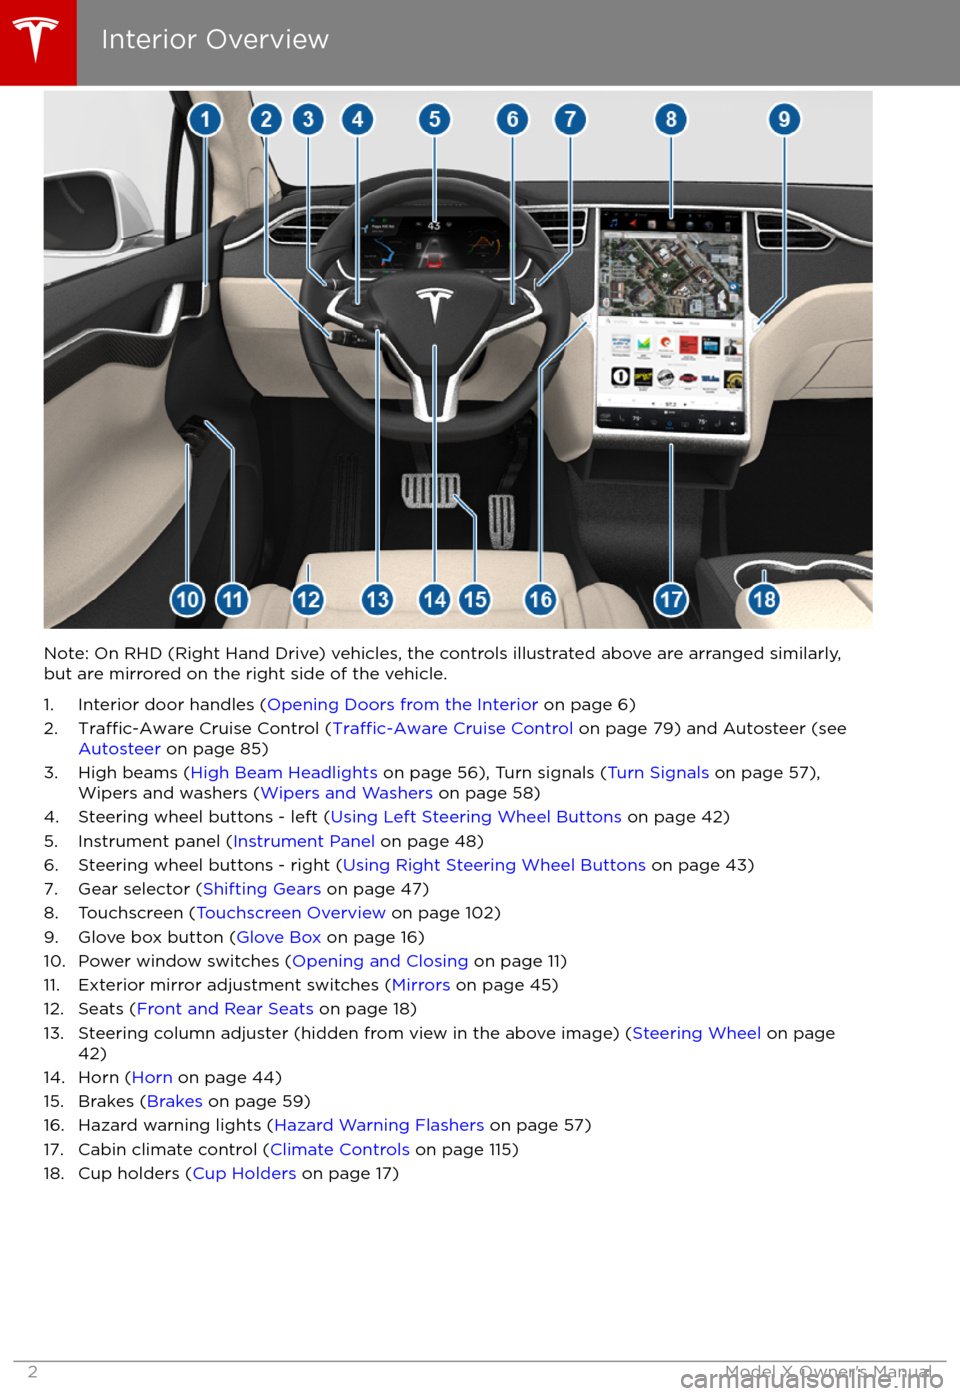 TESLA MODEL X 2017  Owners Manual (UK) Note: On RHD (Right Hand Drive) vehicles, the controls illustrated above are arranged similarly,but are mirrored on the right side of the vehicle.
1. Interior door handles ( Opening Doors from the Int